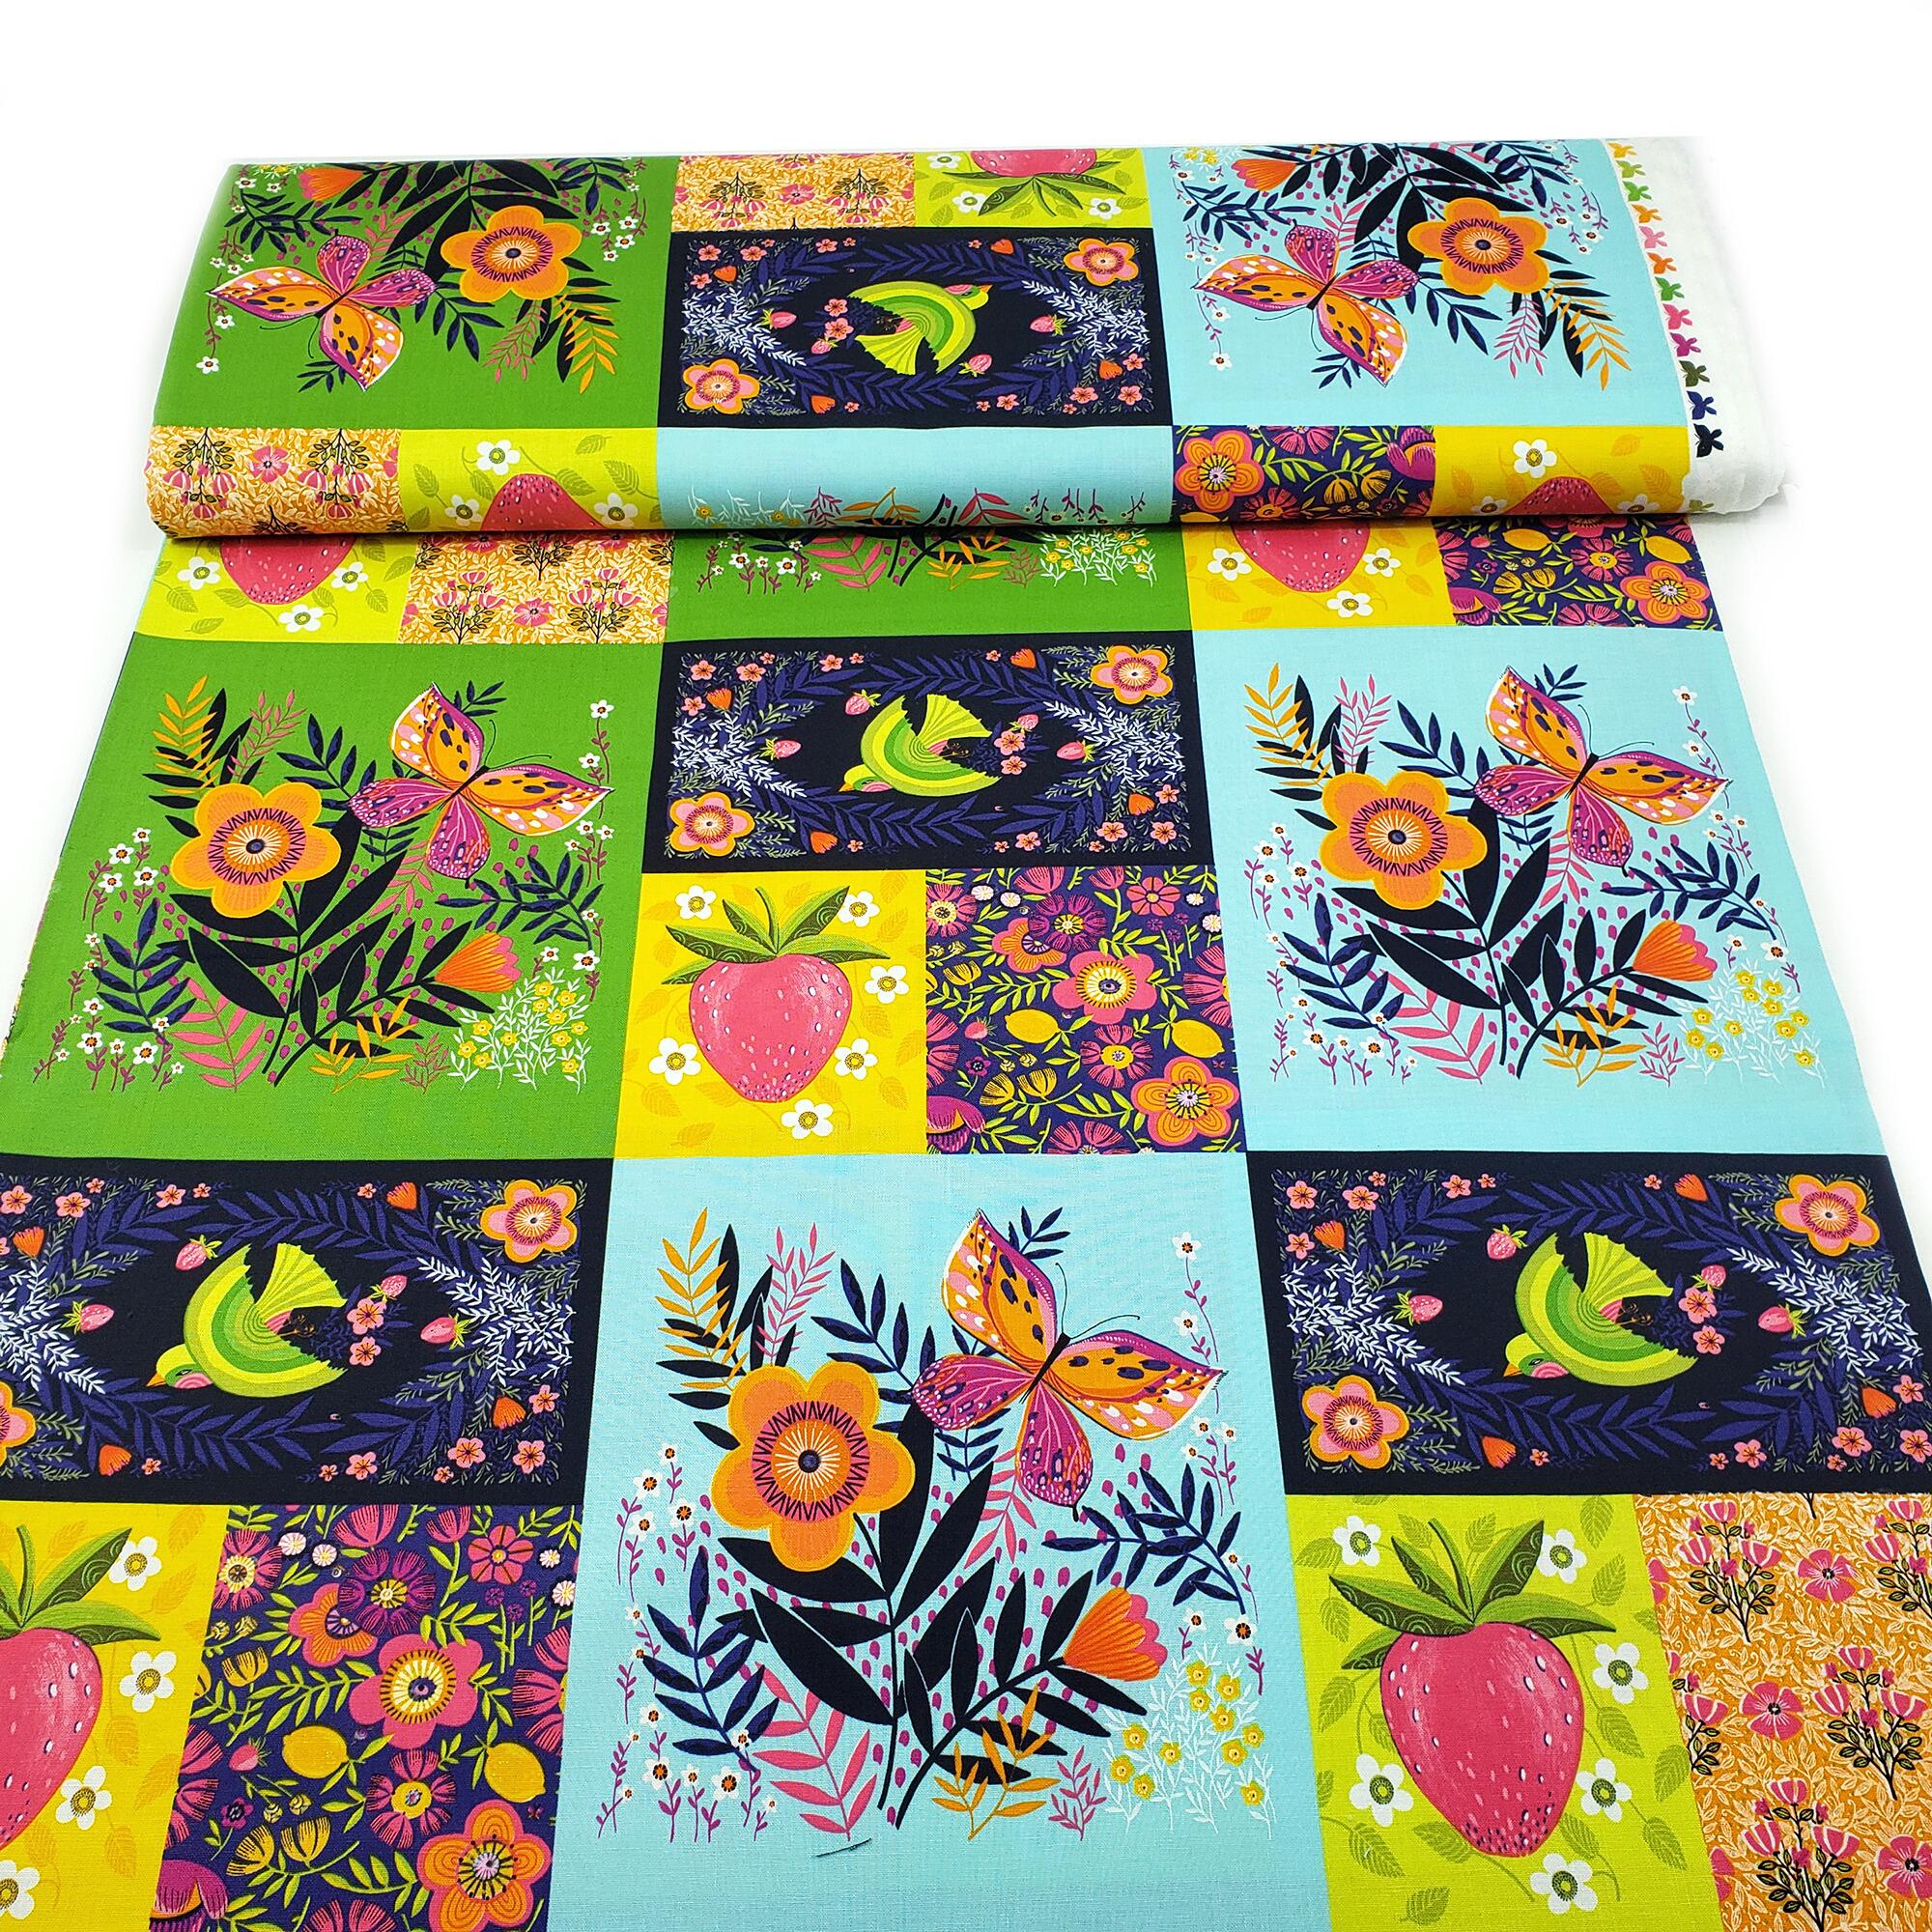 cori dantini,summer love,dreaming,harlequin,birds,floral fabric,butterflies,bright,cheerful,colourful,cotton,quilting